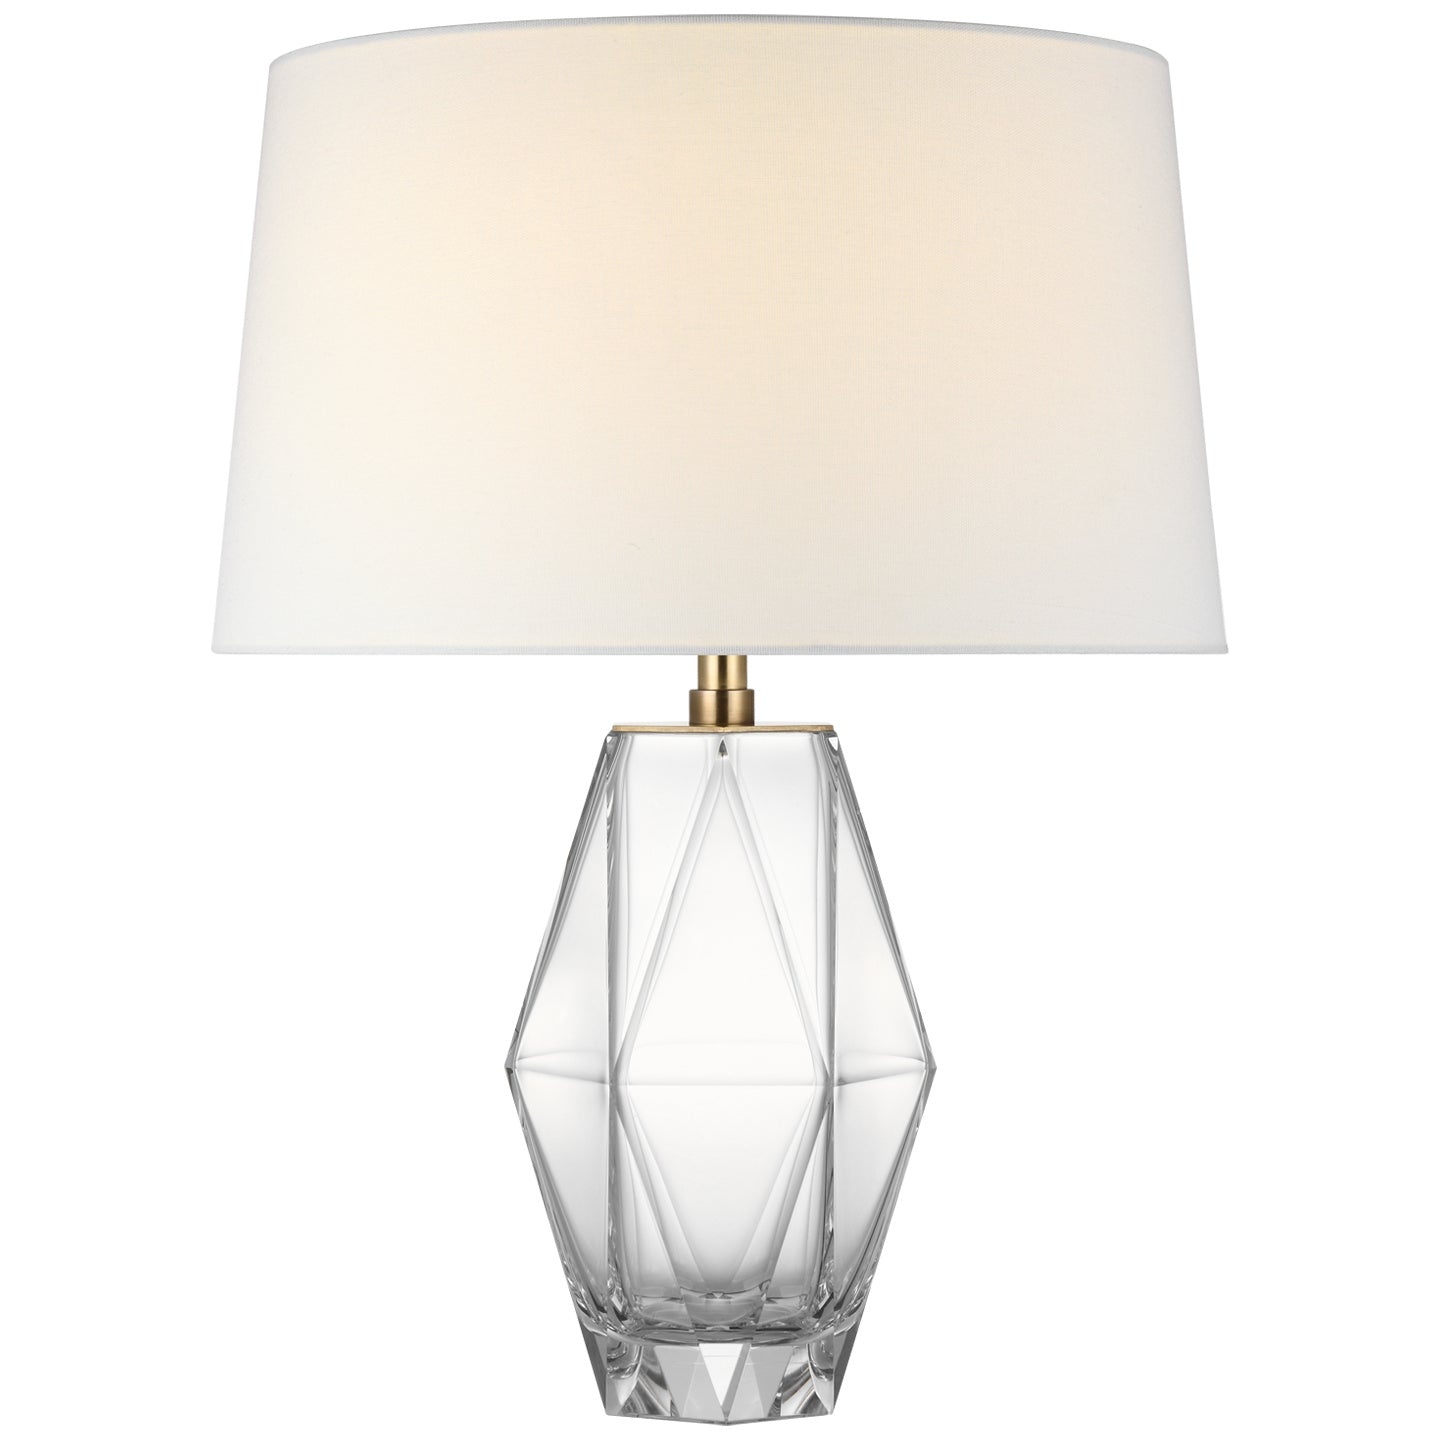 Load image into Gallery viewer, Visual Comfort Signature - CHA 8439CG-L - LED Table Lamp - Palacios - Clear Glass
